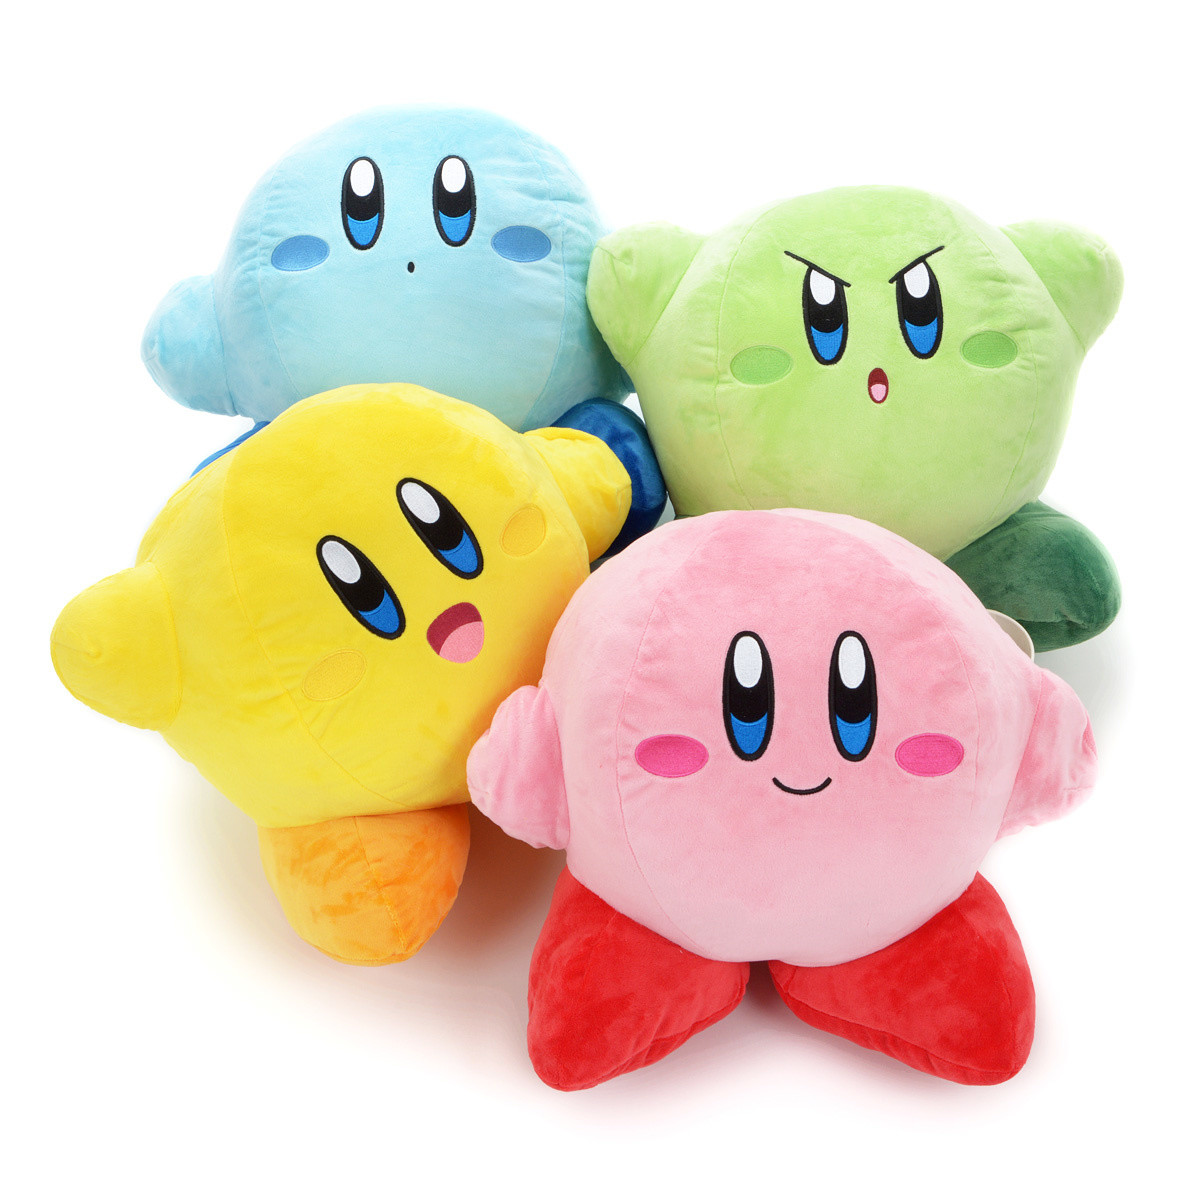 all kirby plushies